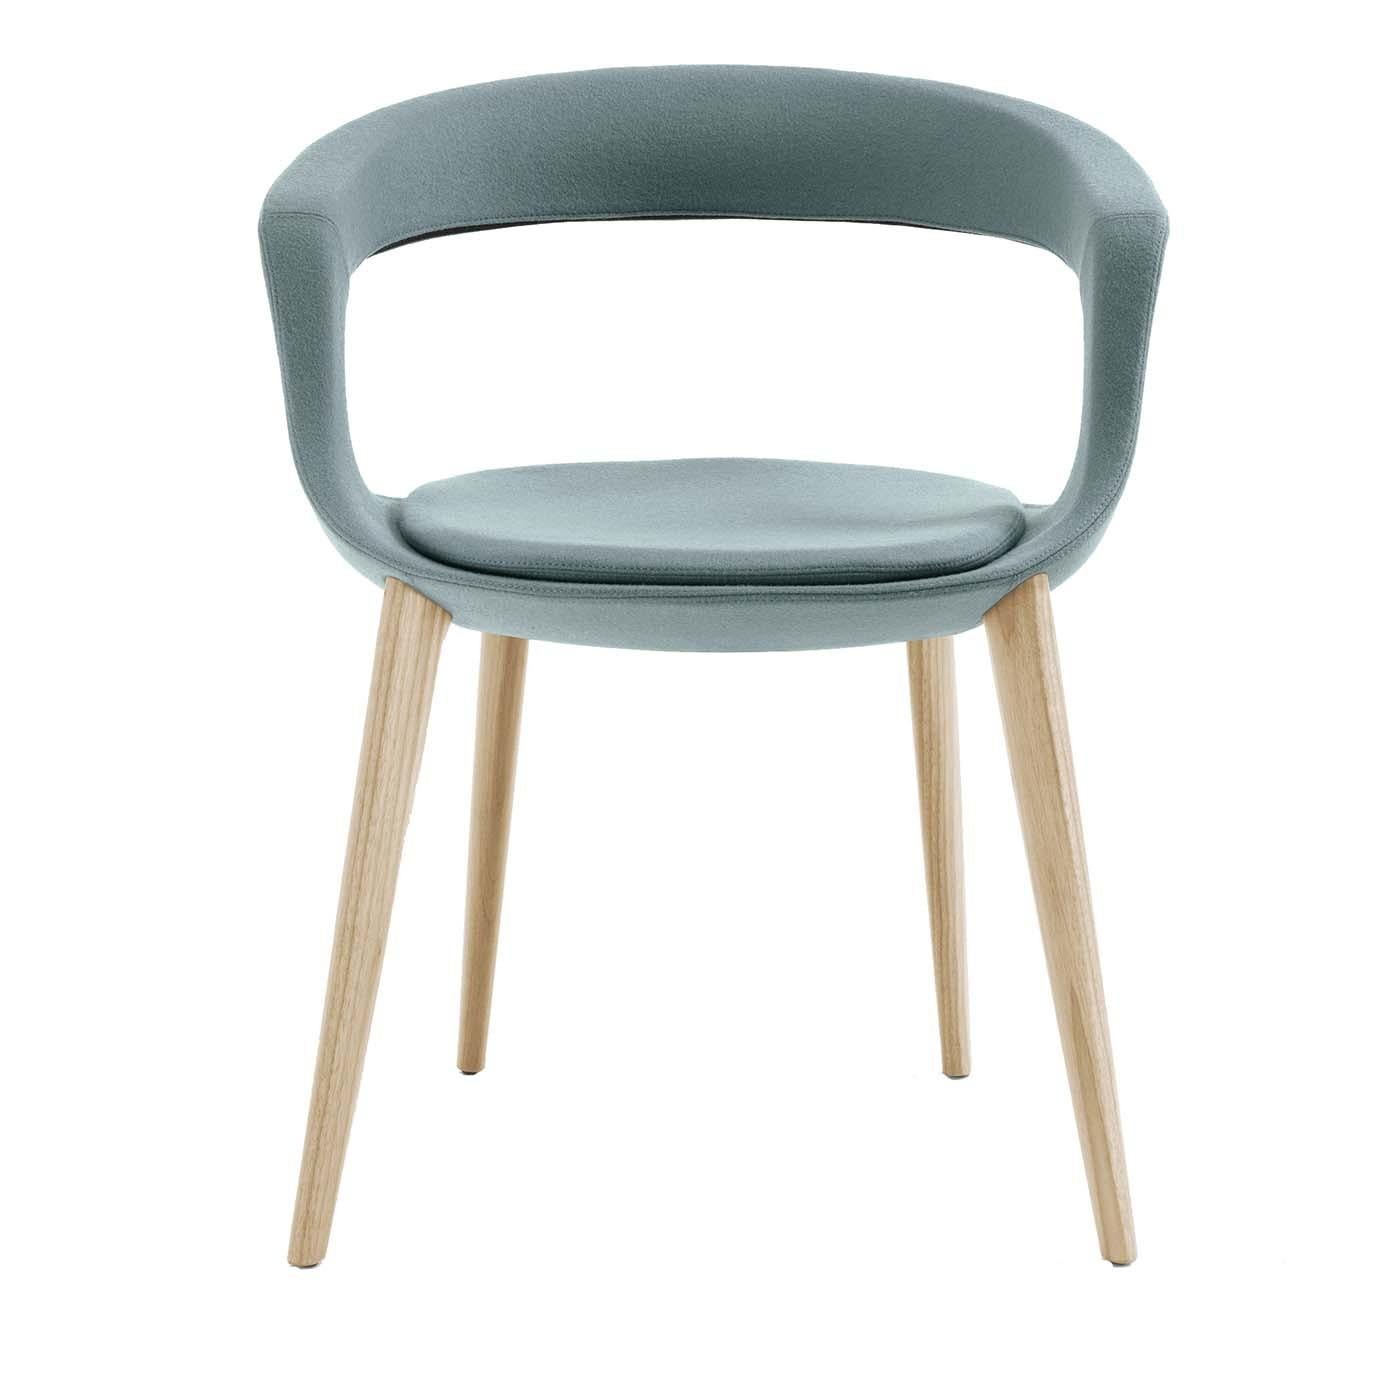 Italian Frenchkiss Low-Backed Wooden-Legged Chair by Stefano Bigi For Sale